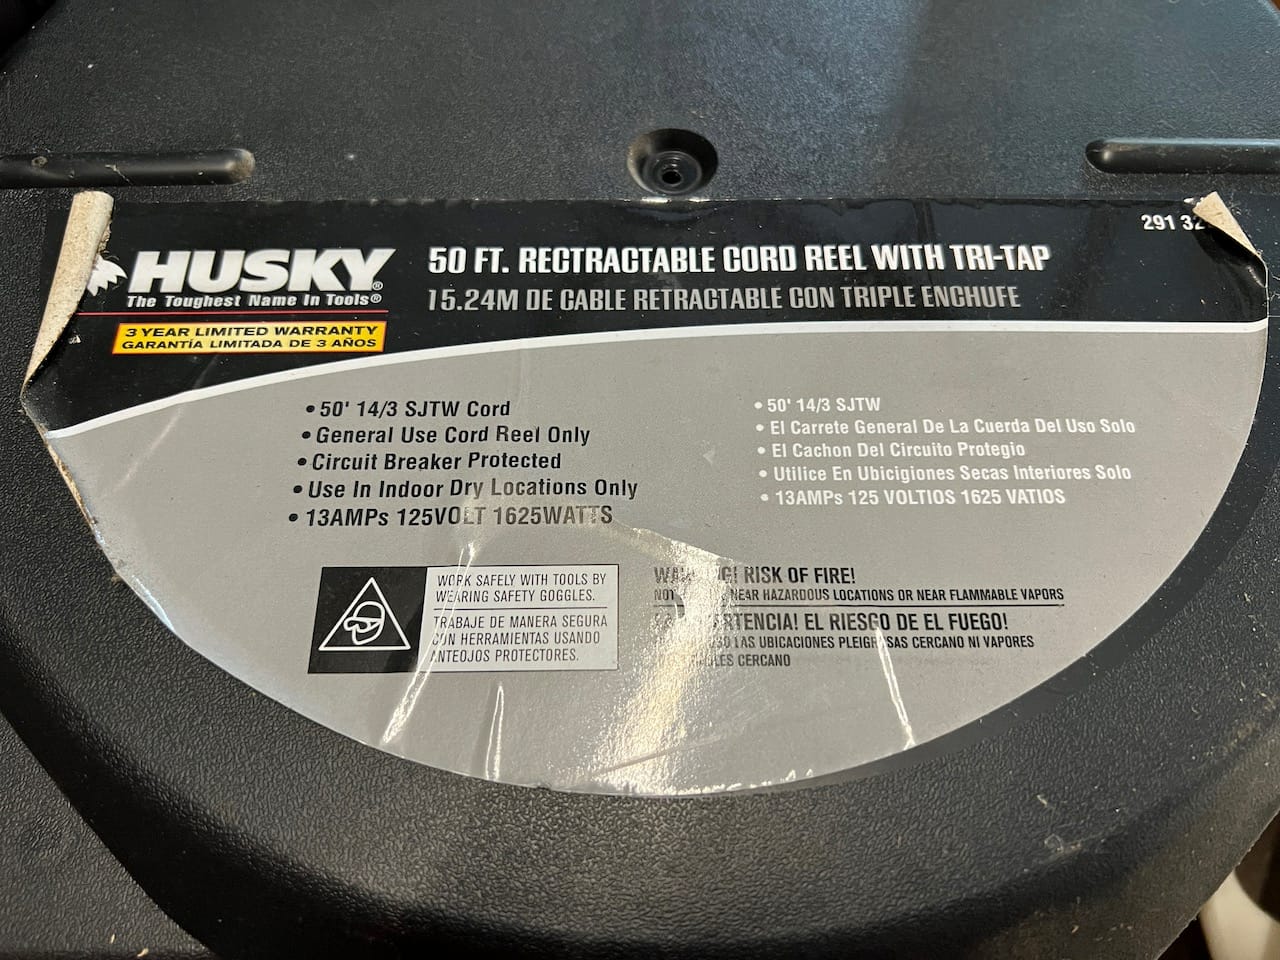 Husky 50 ft. Retractable Extension Cord Reel Review